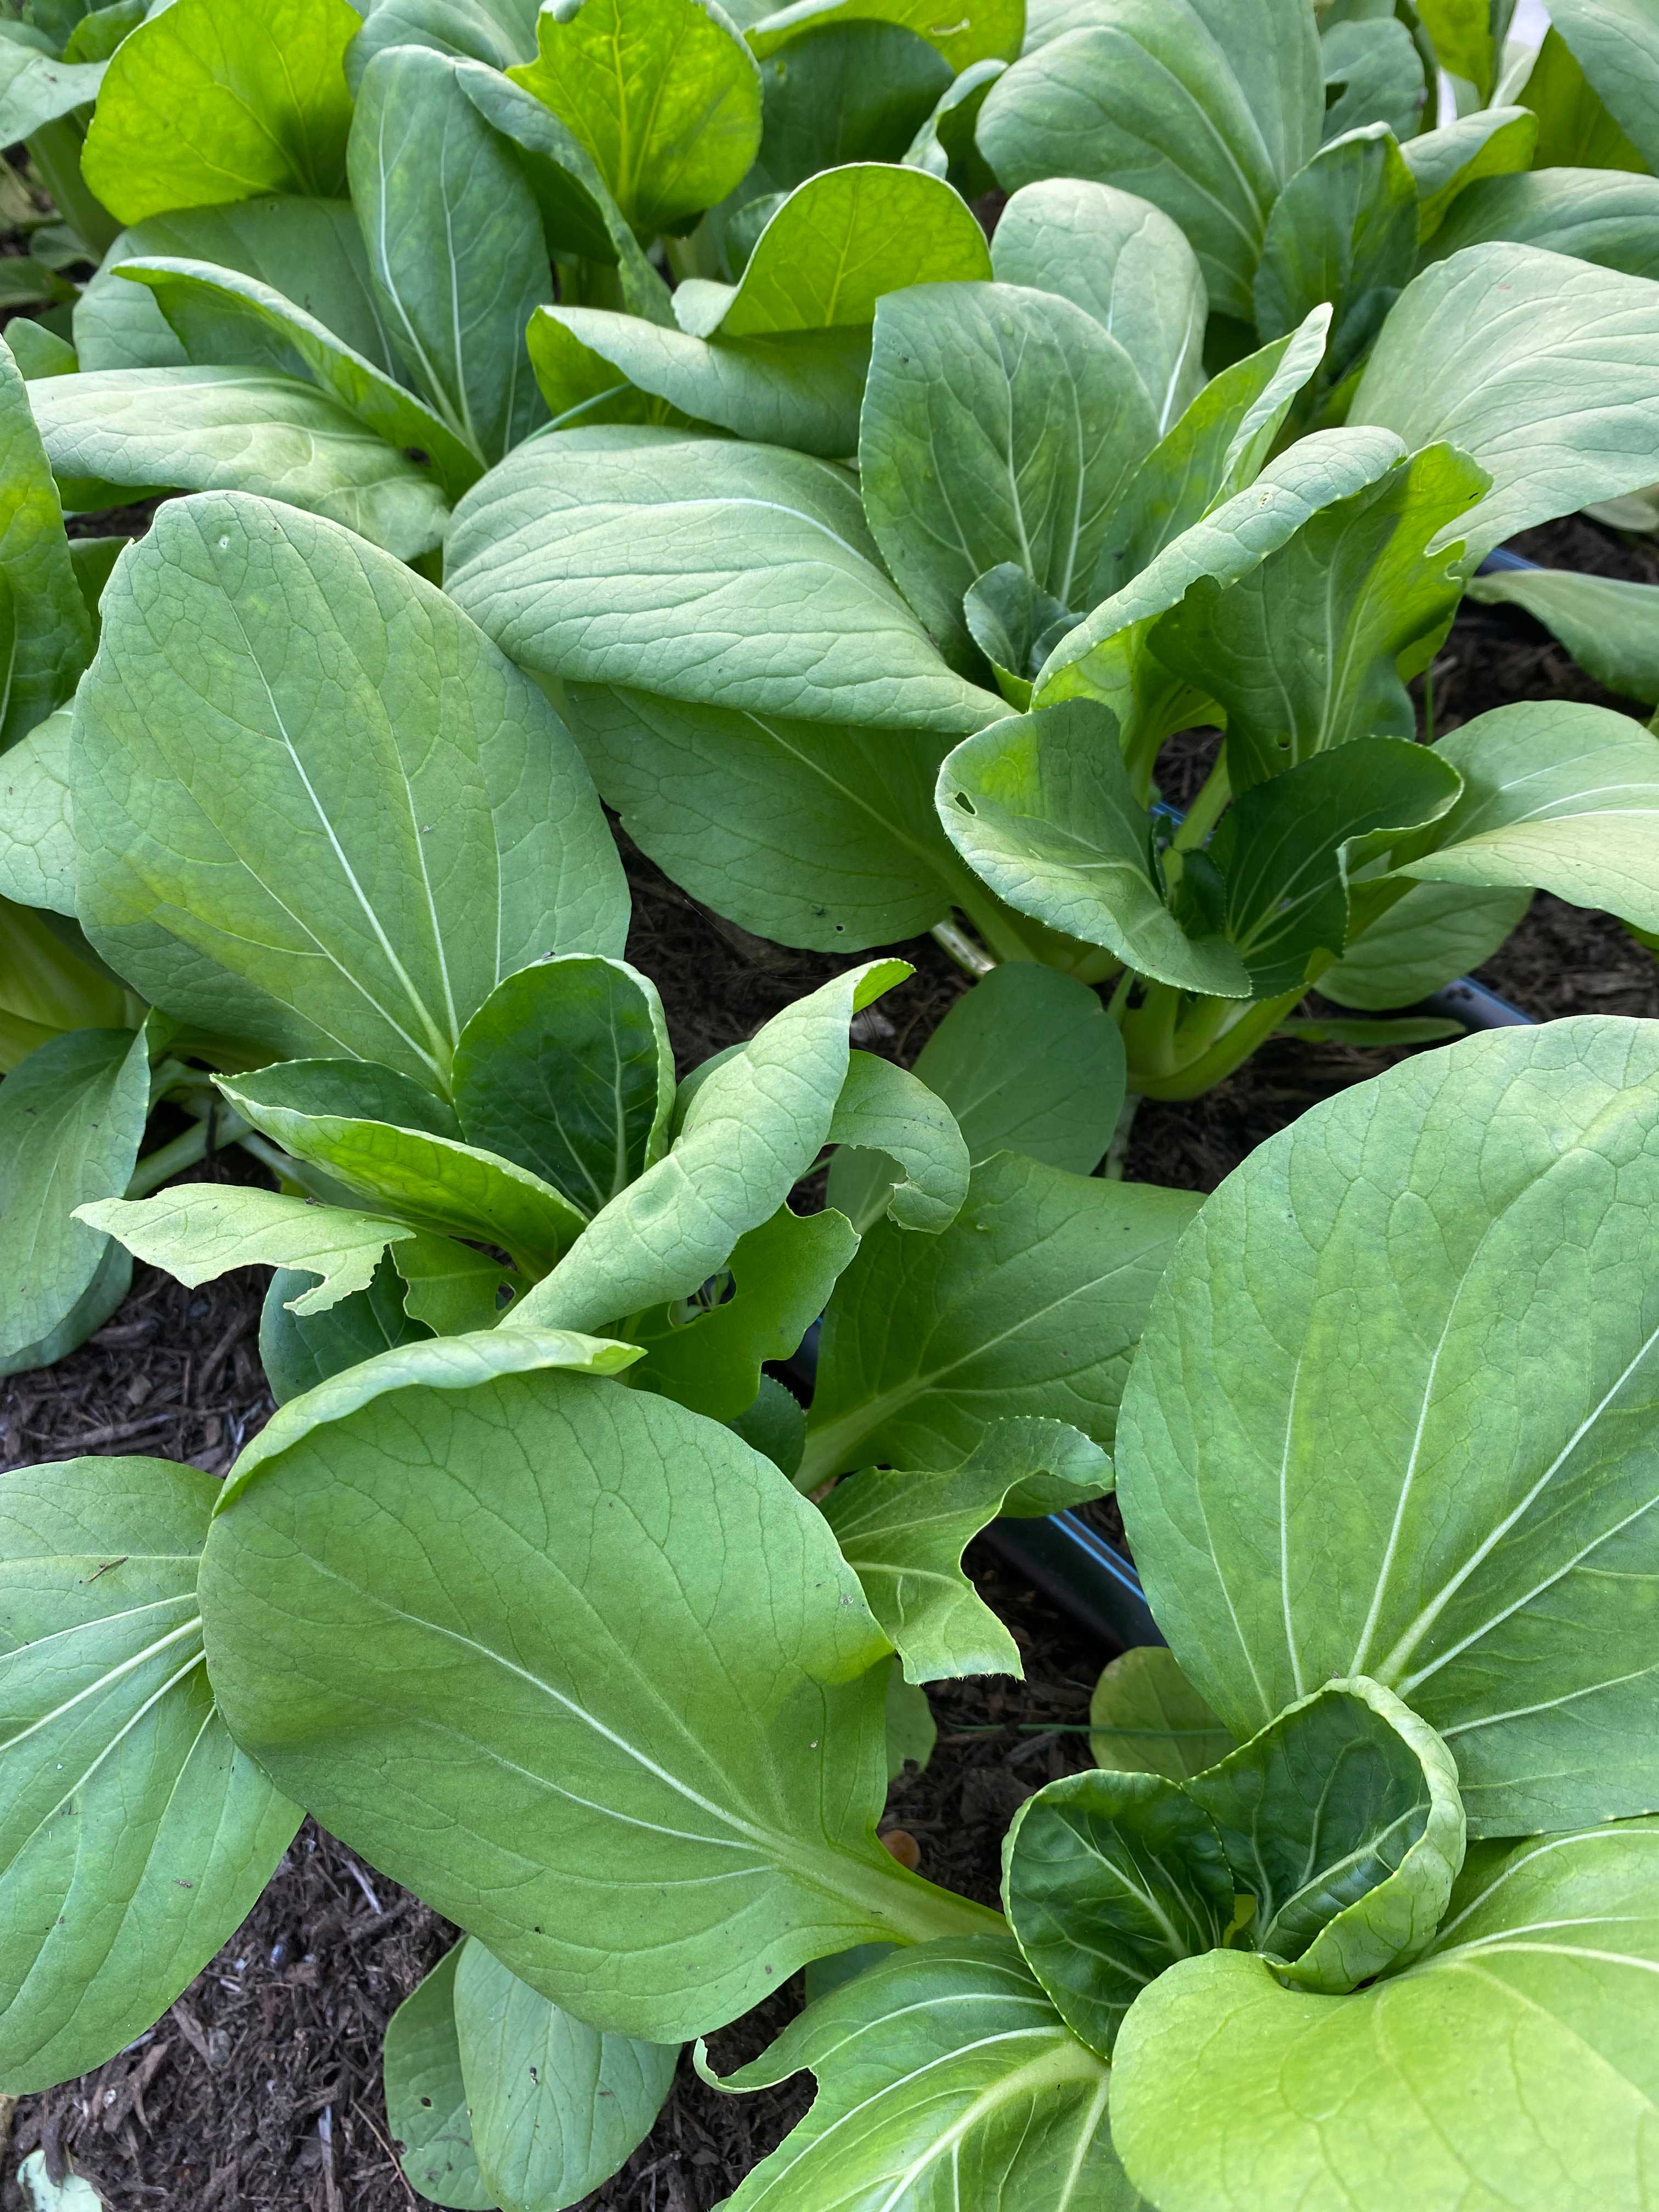 A picture of Pak Choi - Shanghai Green